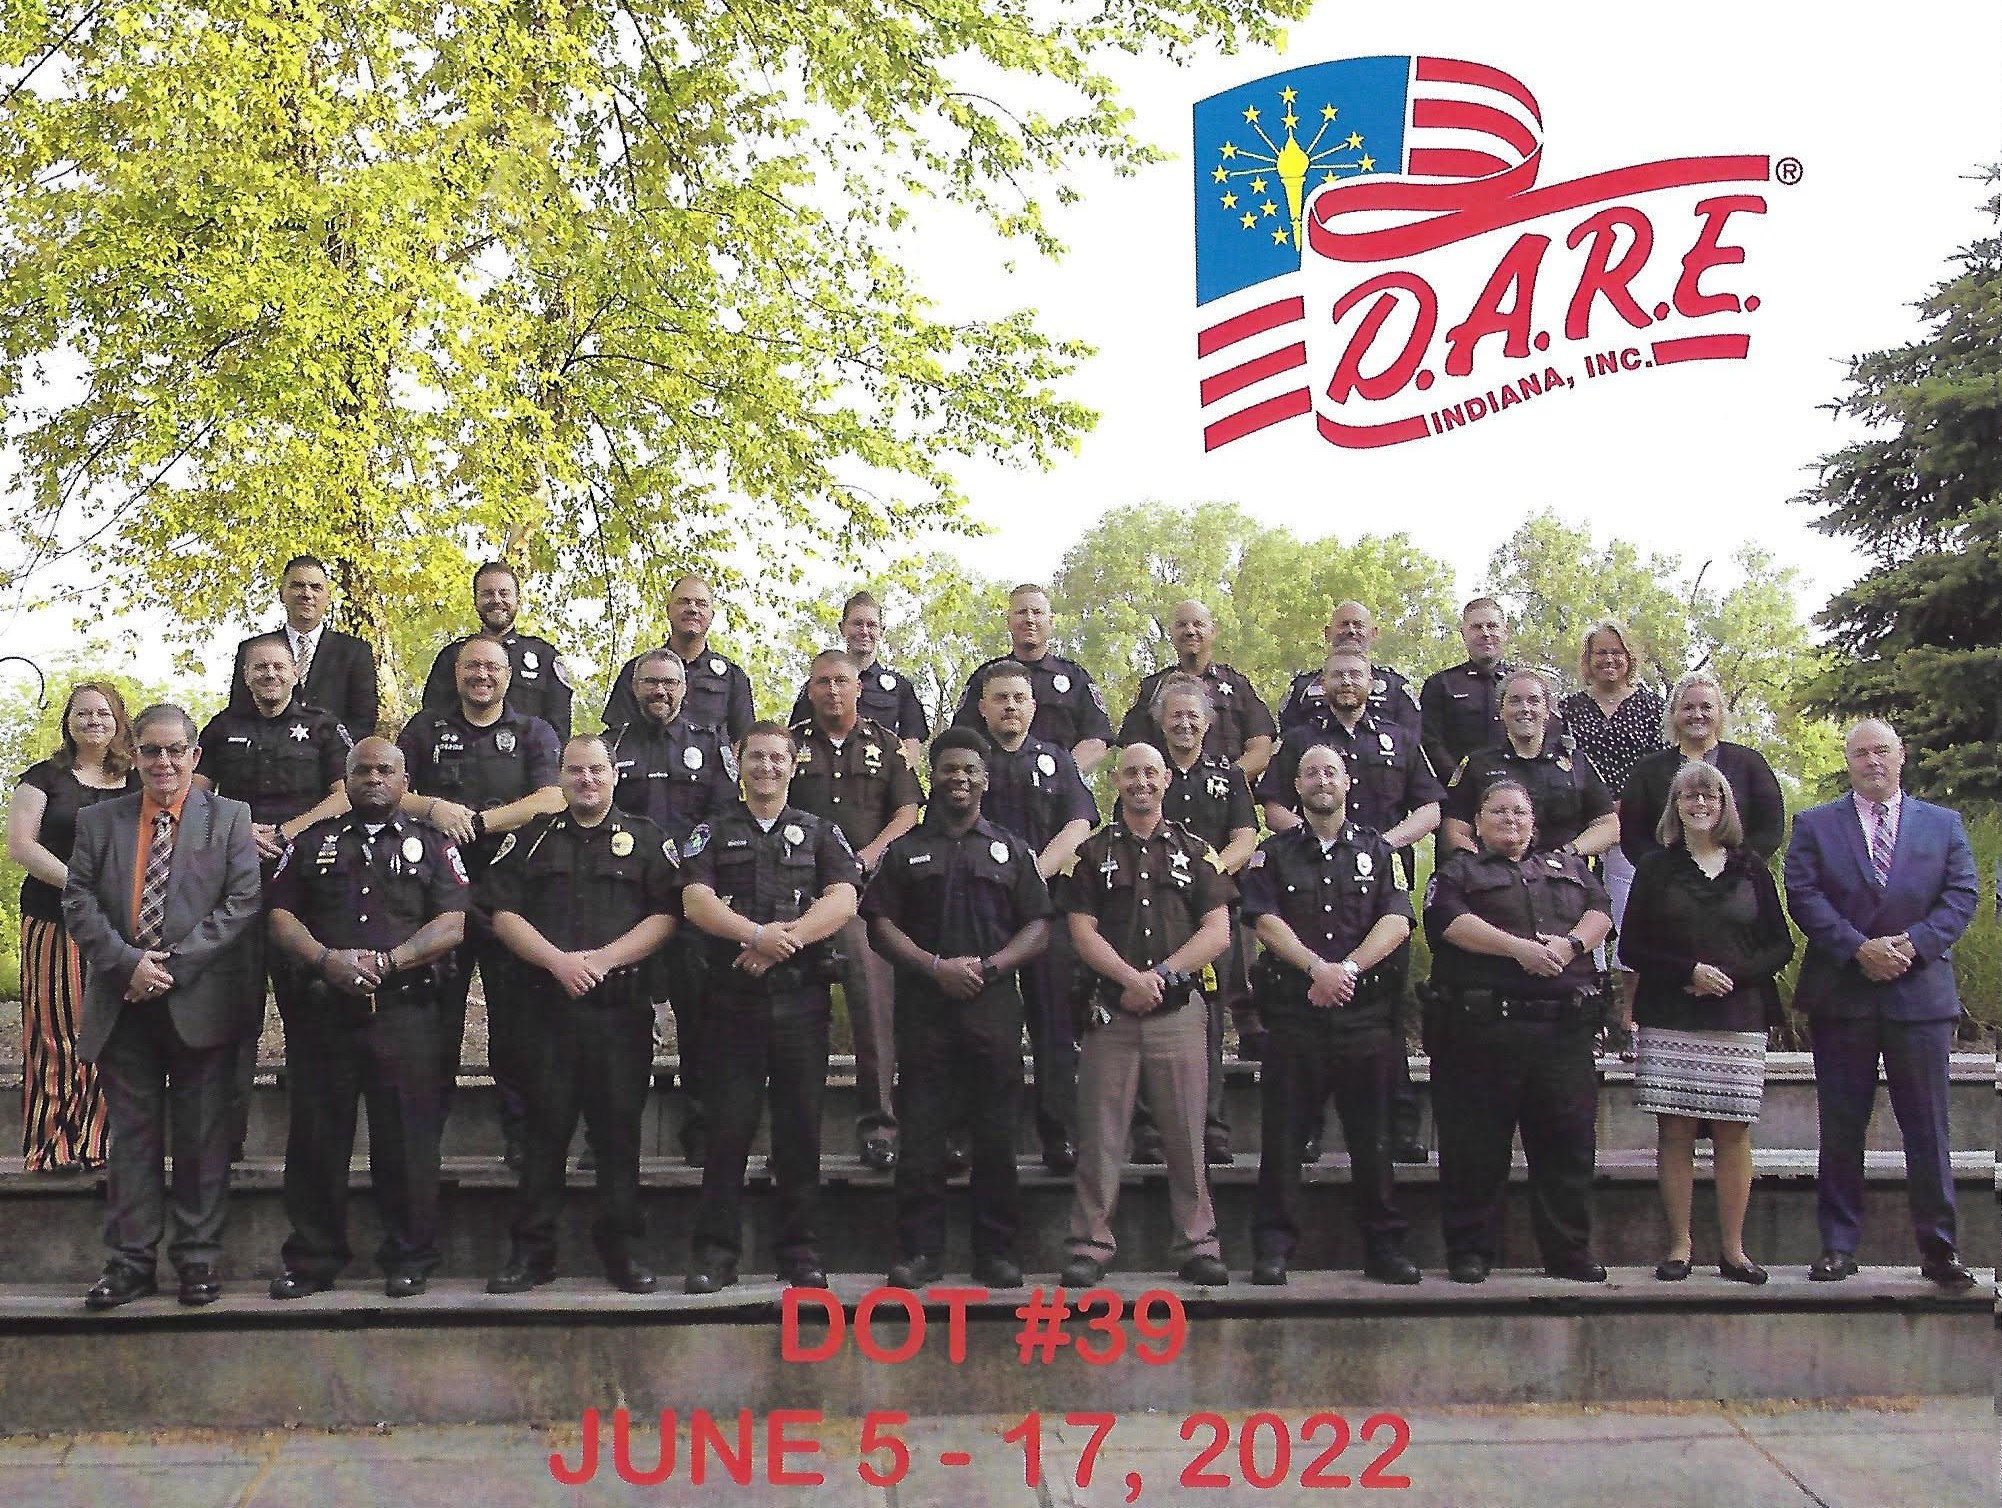 Indiana D.A.R.E. (Drug Abuse Resistance Education) welcomed 22 law enforcement candidates into Indiana D.A.R.E. Class #39 on Sunday, June 5th, 2022. The intensive two-week training was hosted by the D.A.R.E. Indiana Training Team at the Riverside Intermediate School in Fishers, IN, culminating on Friday, June 17, 2022.   Candidates representing five (5) states – IN, MI, OH, IL & WV, attended and successfully completed the intensive 80+ hour course.   The program builds trust and confidence by prompting the input of the school staff and families.  D.A.R.E. brings curriculum-trained officers into the classrooms to form positive relationships.  Welcome to the D.A.R.E. Family!